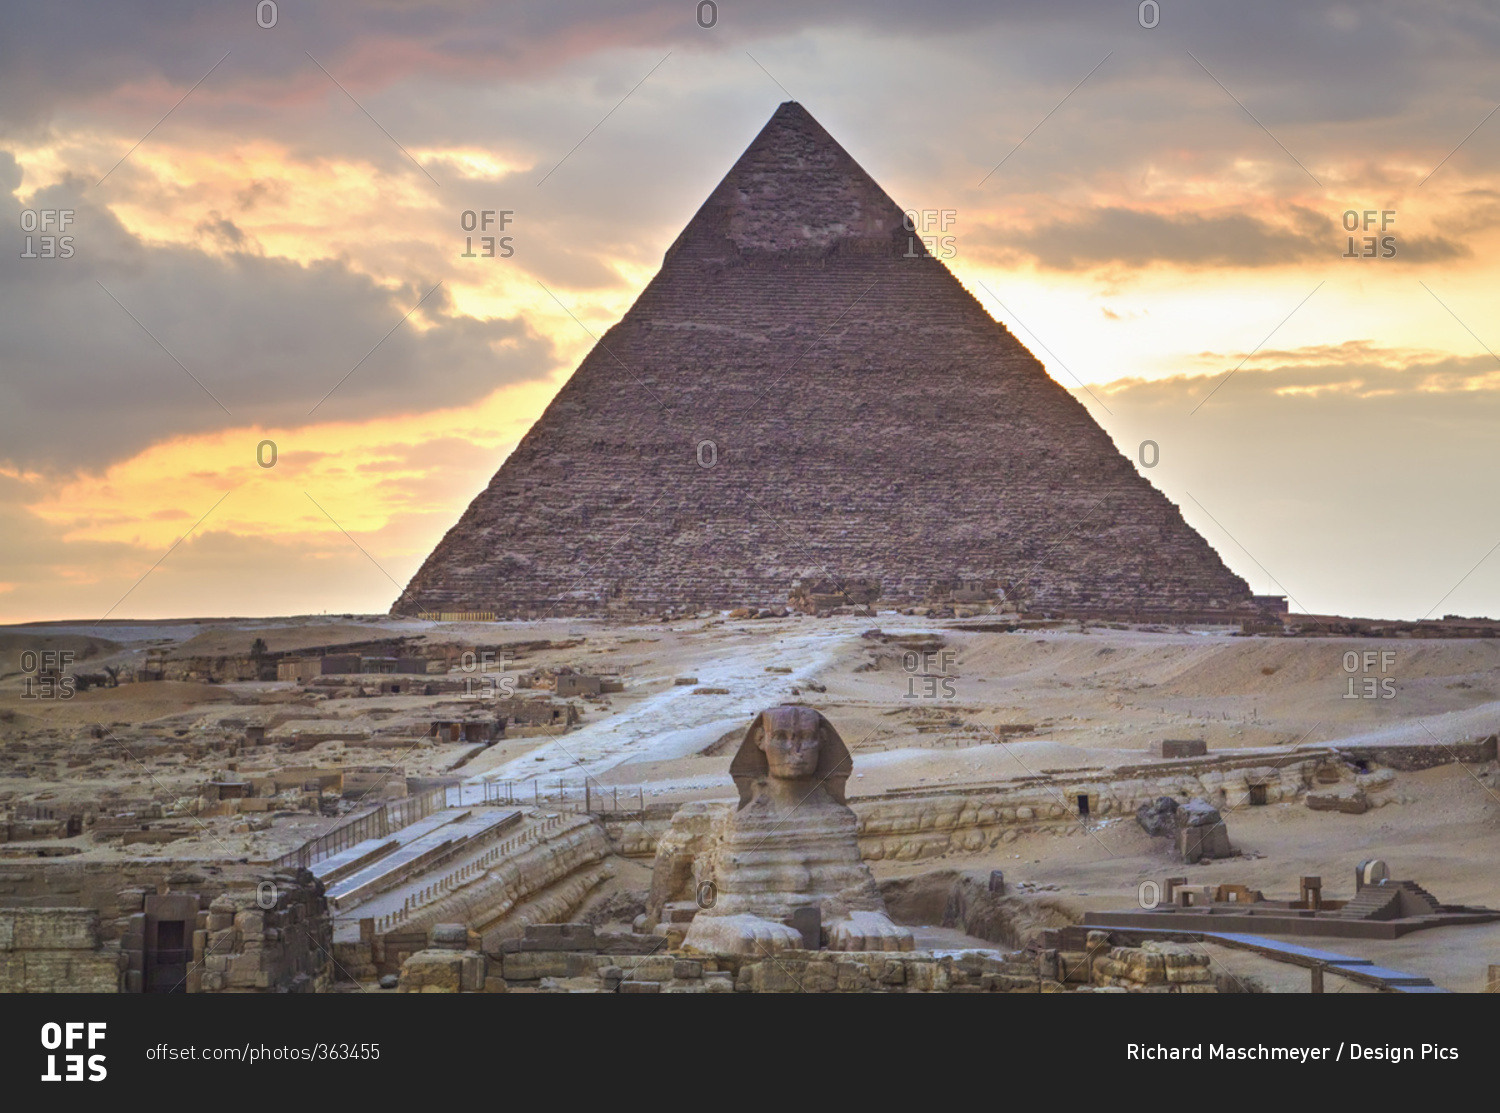 Sunset, Sphinx (foreground), The Pyramid of Chephren
(background), The Pyramids of Giza; Giza, Egypt stock photo -
OFFSET